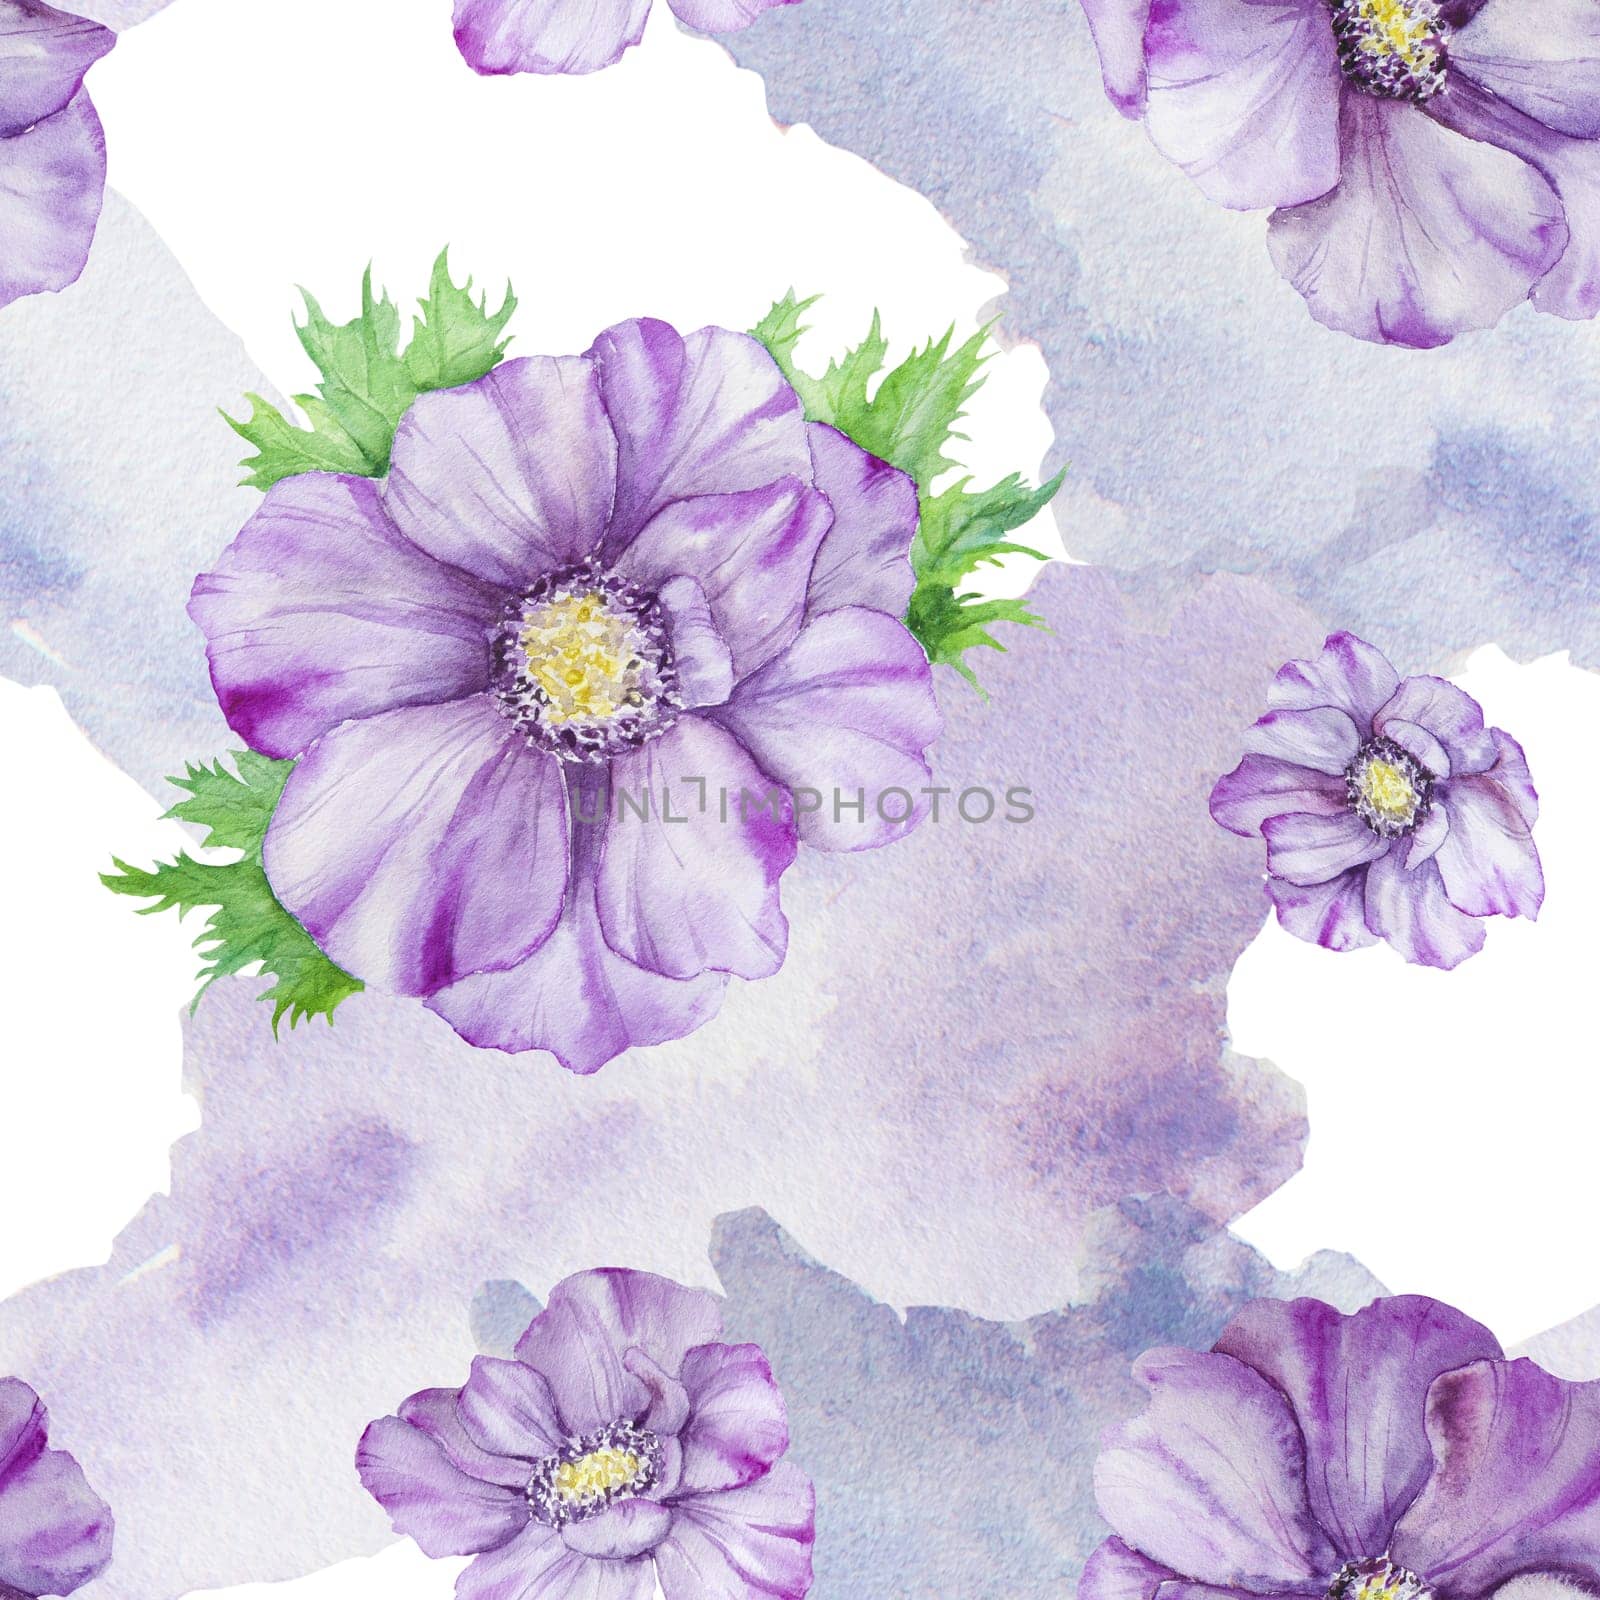 Watercolor hand drawn seamless pattern of purple anemones with green leaves isolated on white background. Great paper, wallpaper, wedding invitations, menu, labels, textile, paper